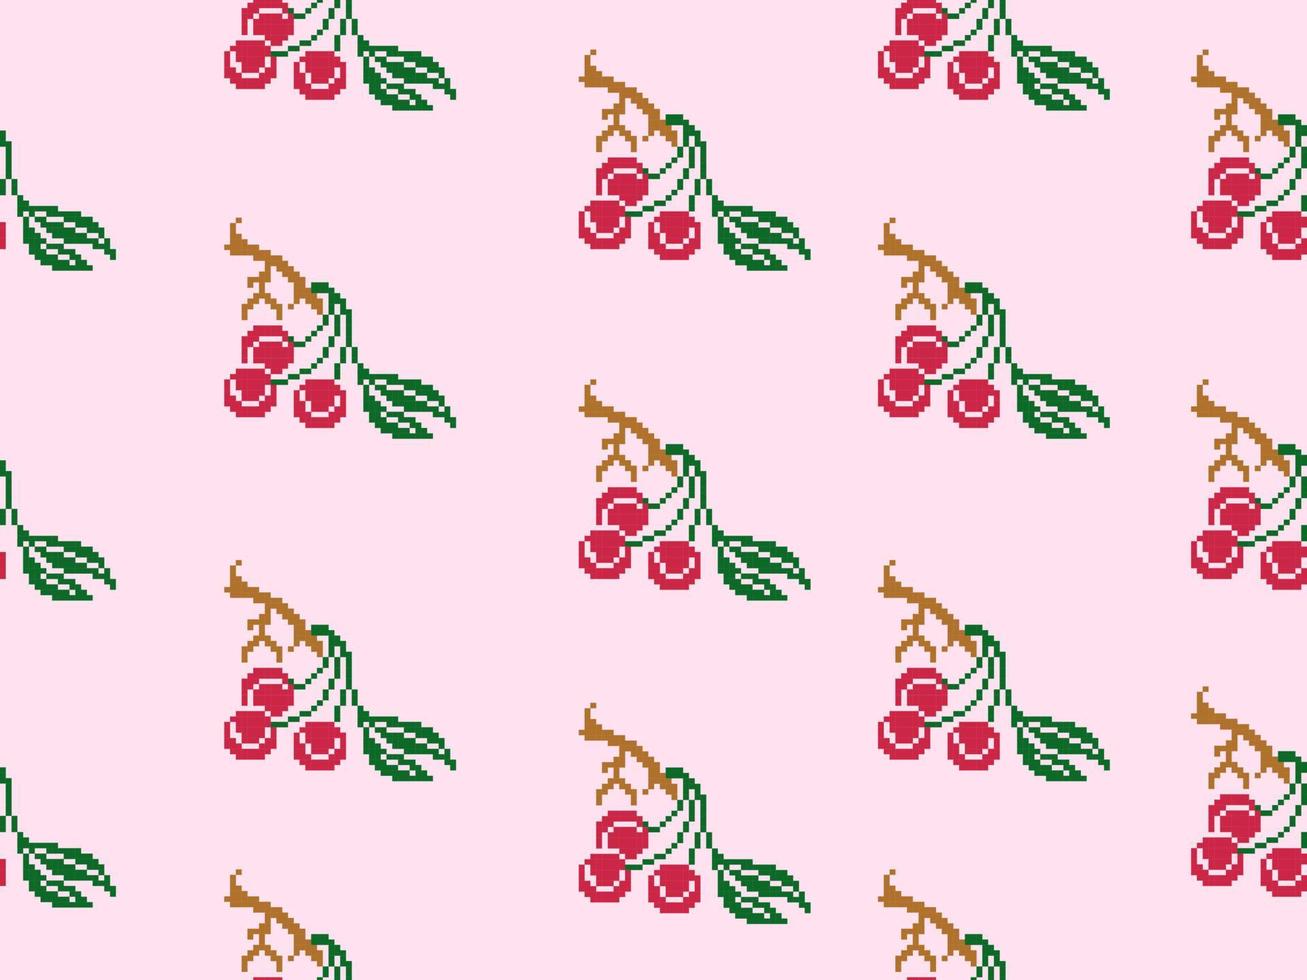 Cherry cartoon character seamless pattern on pink background.Pixel style vector